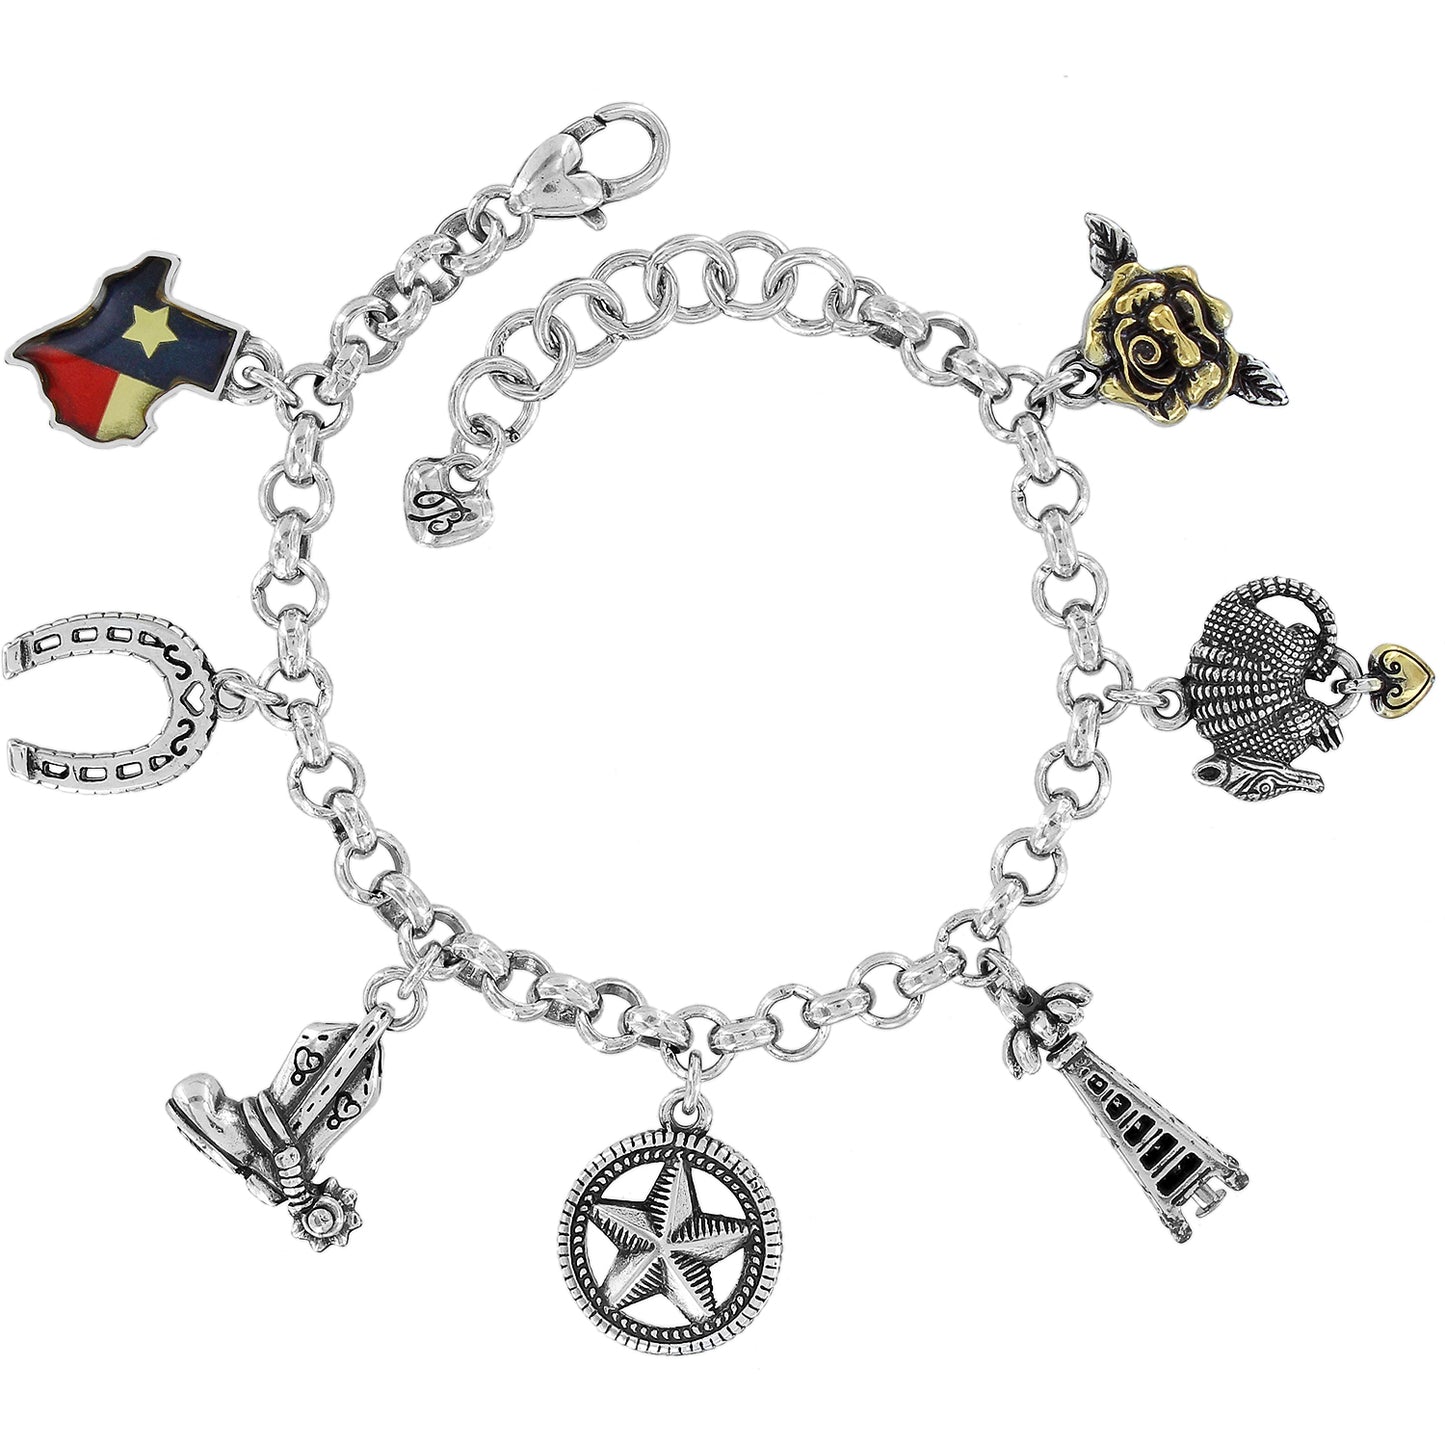 Texas Charm Bracelet - Jillicious charms and accessories